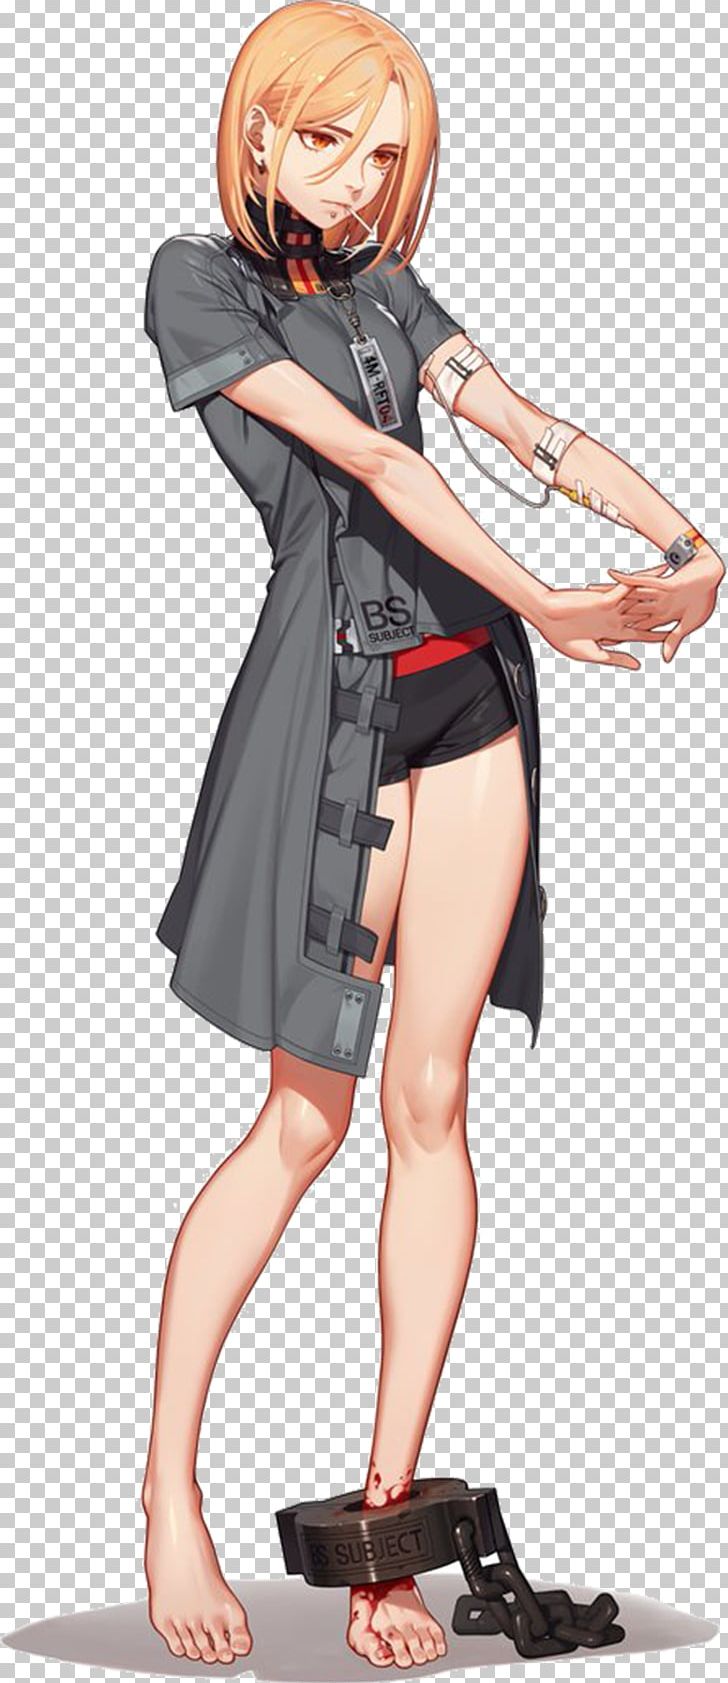 Black Survival Character ARCHBEARS Attribute Database PNG, Clipart, Anime,  Archbears, Attribute, Black Survival, Character Free PNG